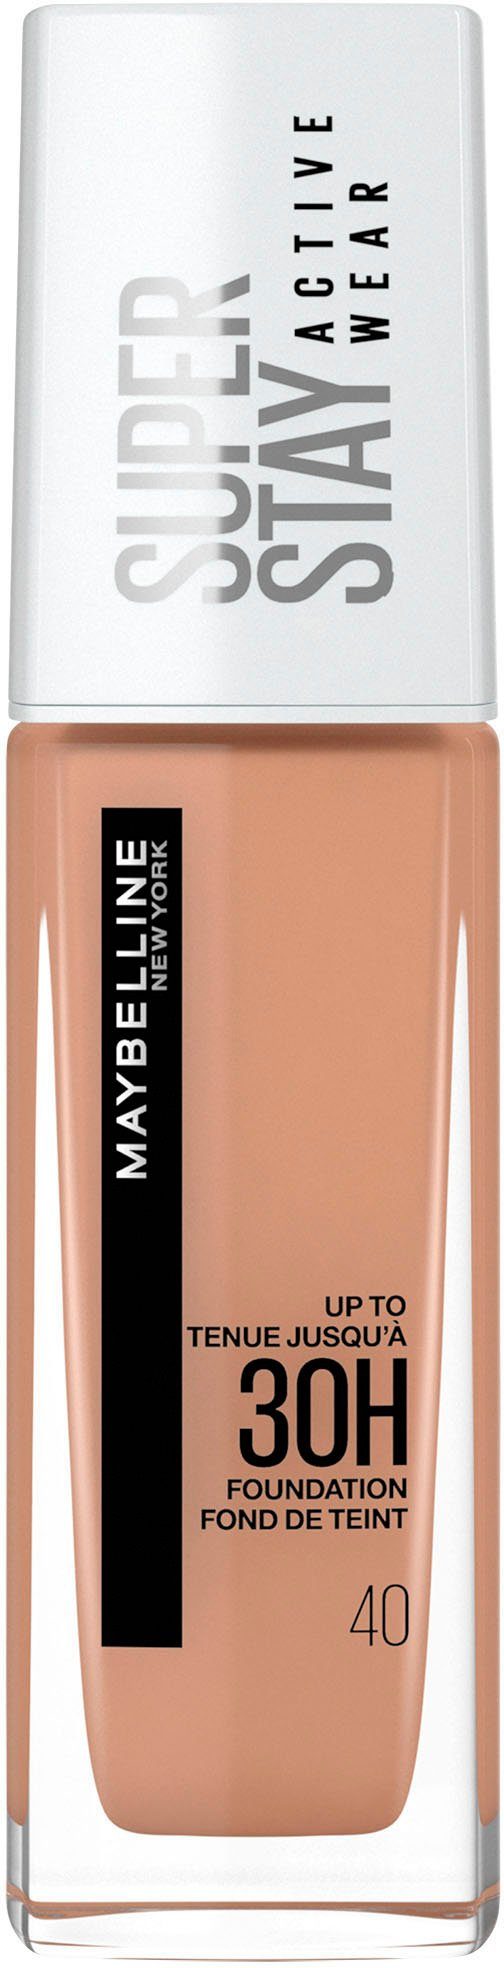 MAYBELLINE NEW Wear Super Stay 40 YORK Fawn Foundation Active